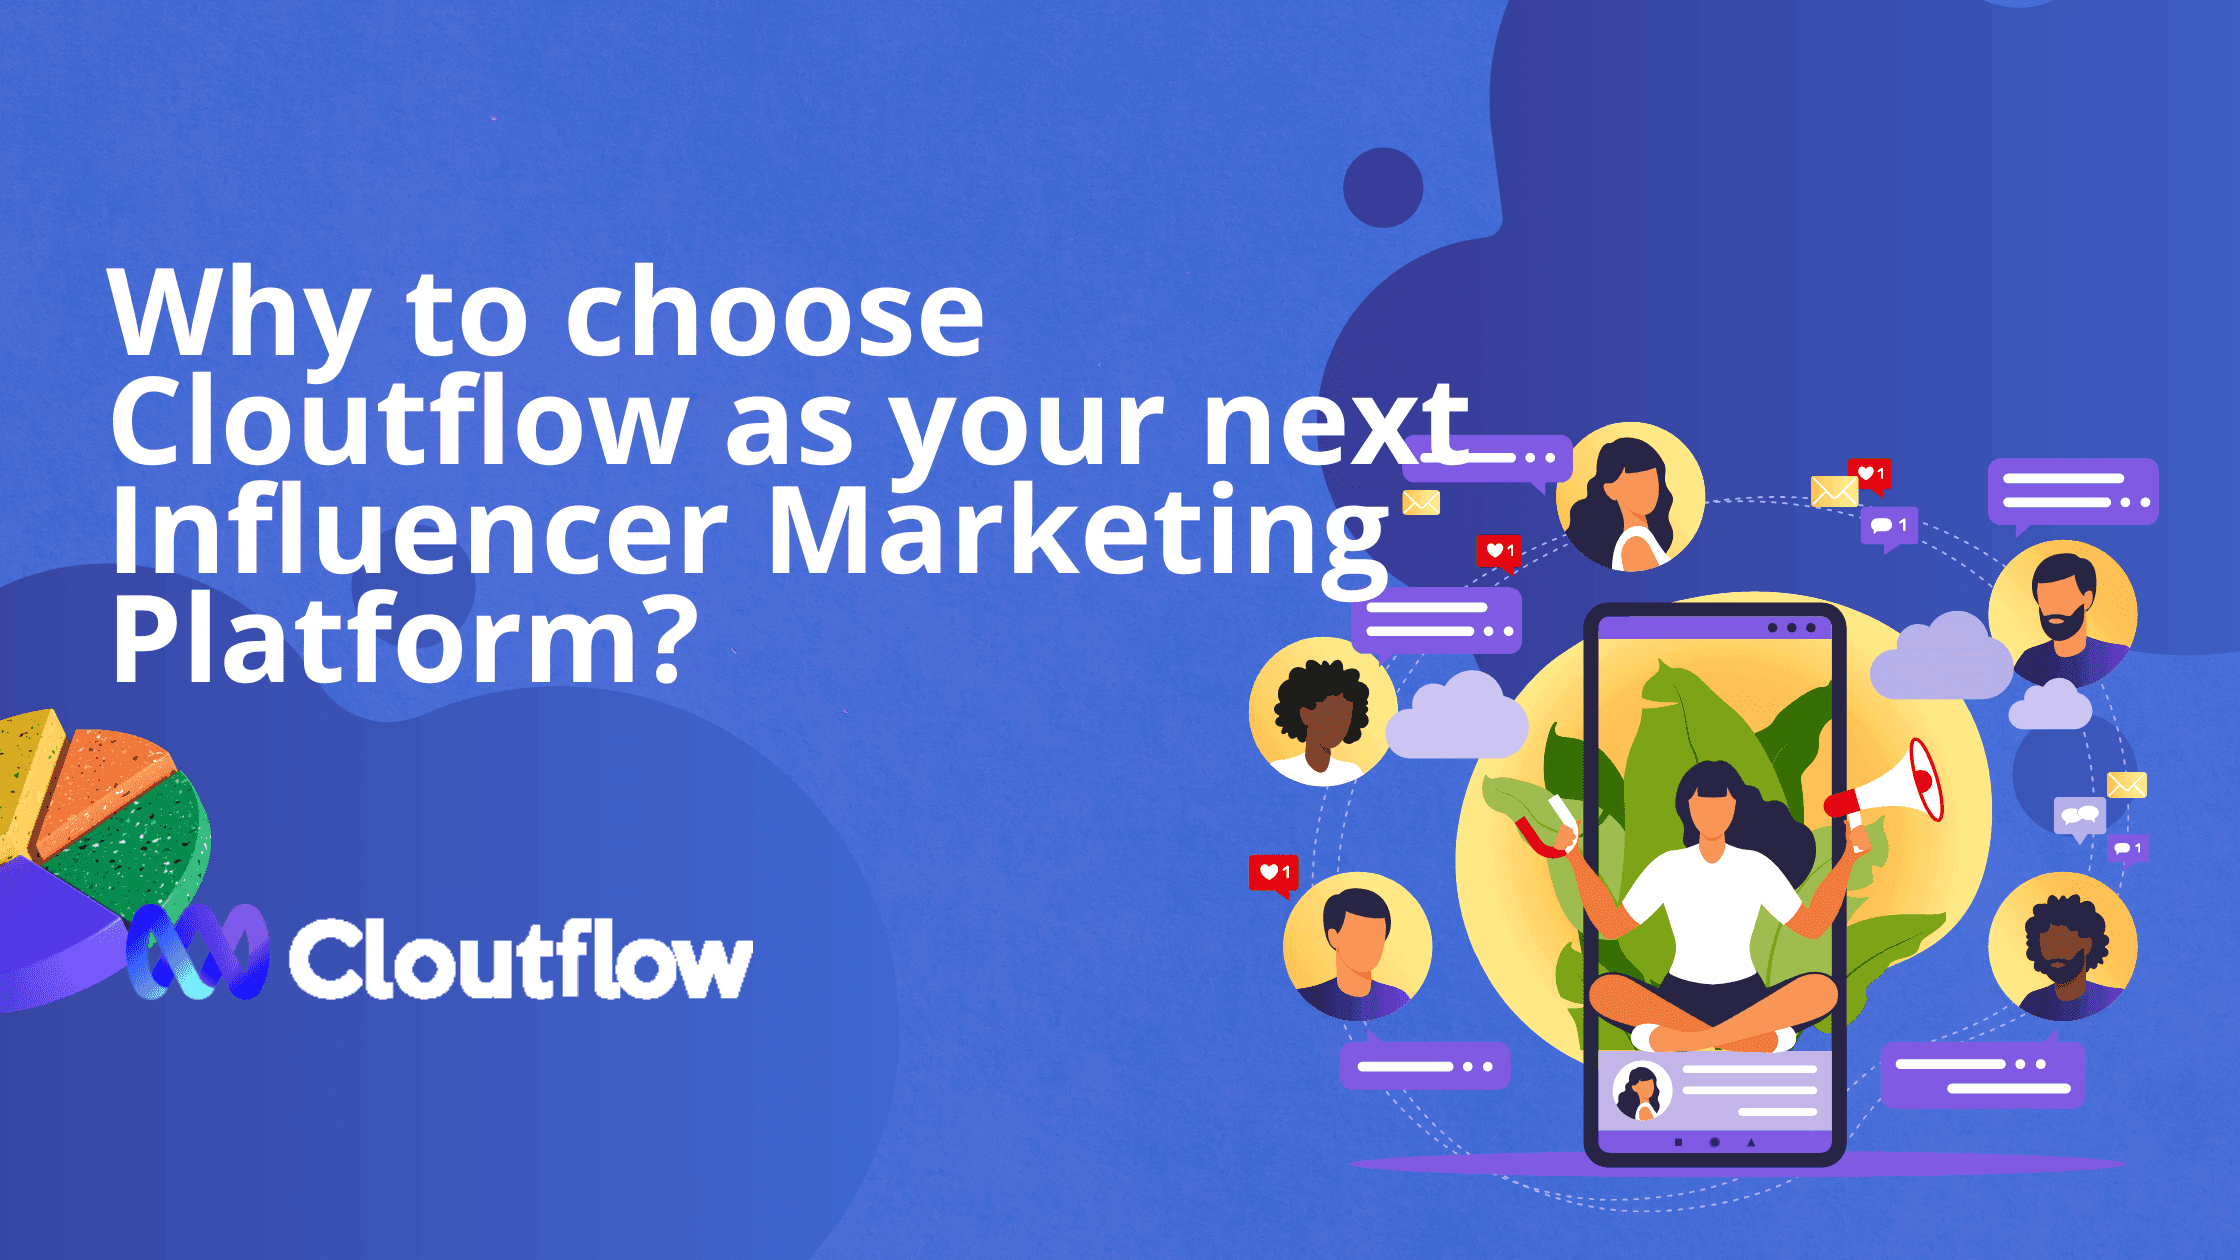 Why to choose Cloutflow as your next Influencer Marketing Platform? image